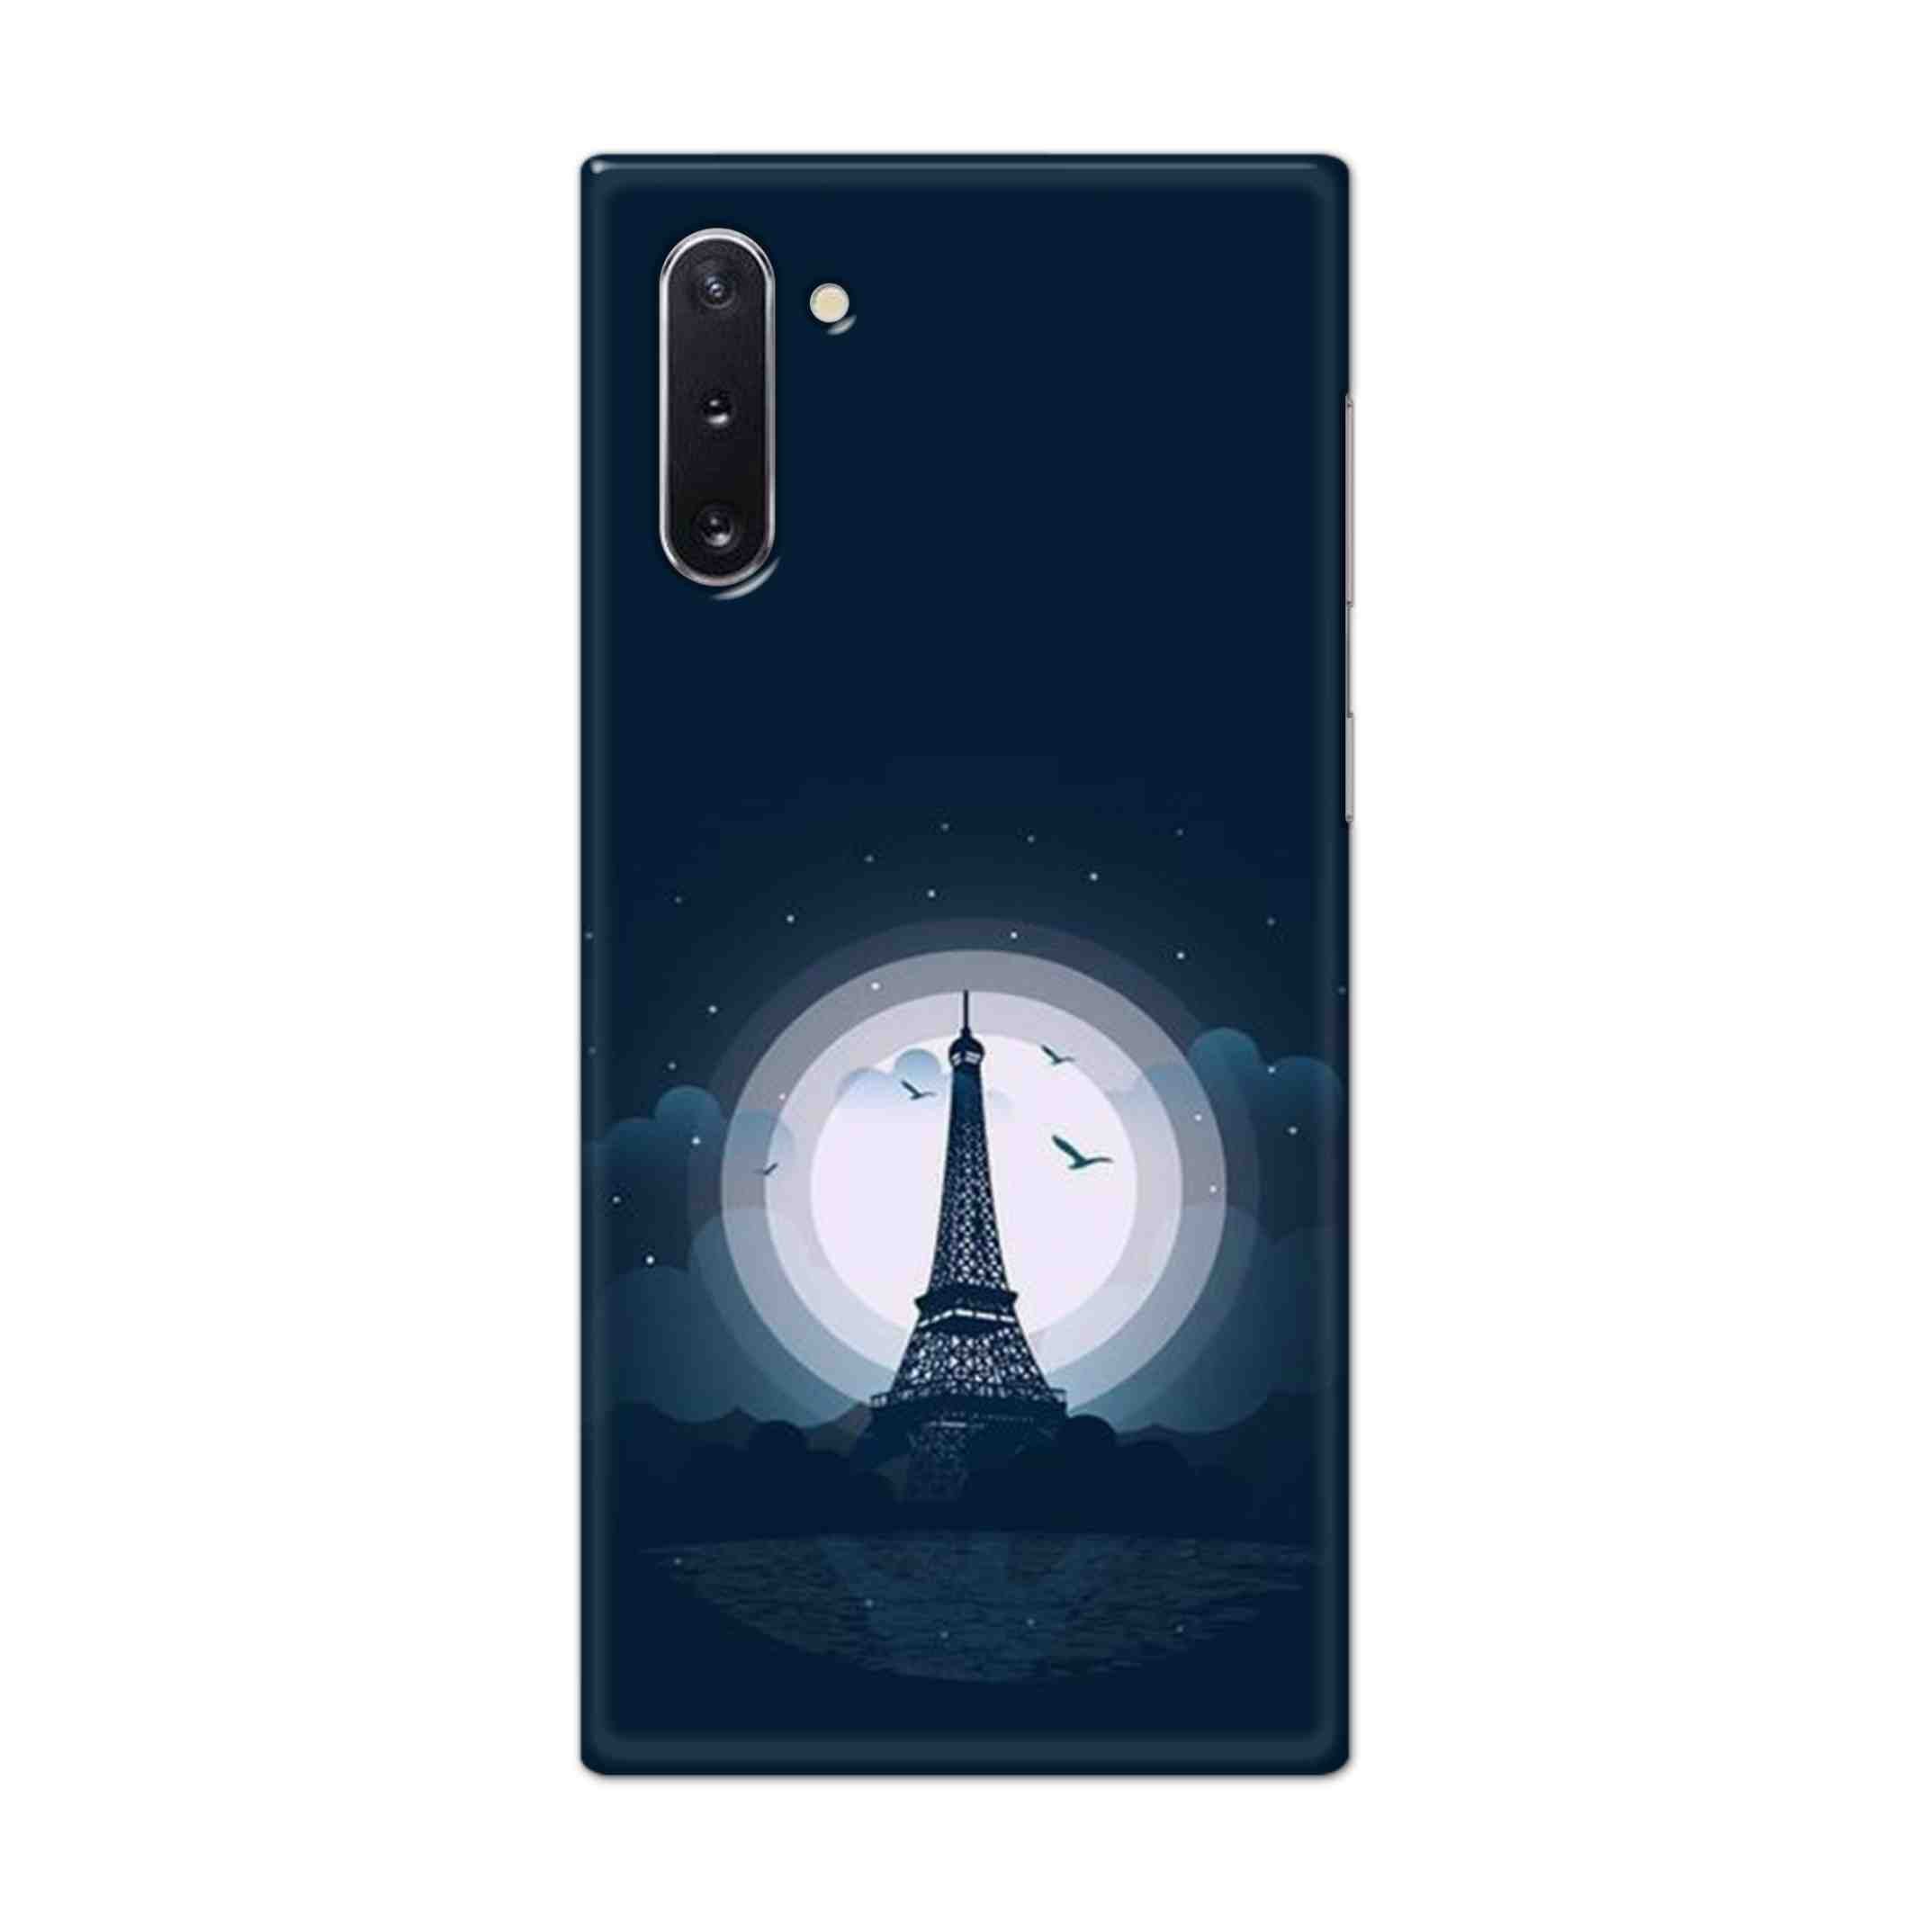 Buy Paris Eiffel Tower Hard Back Mobile Phone Case Cover For Samsung Galaxy Note 10 Online